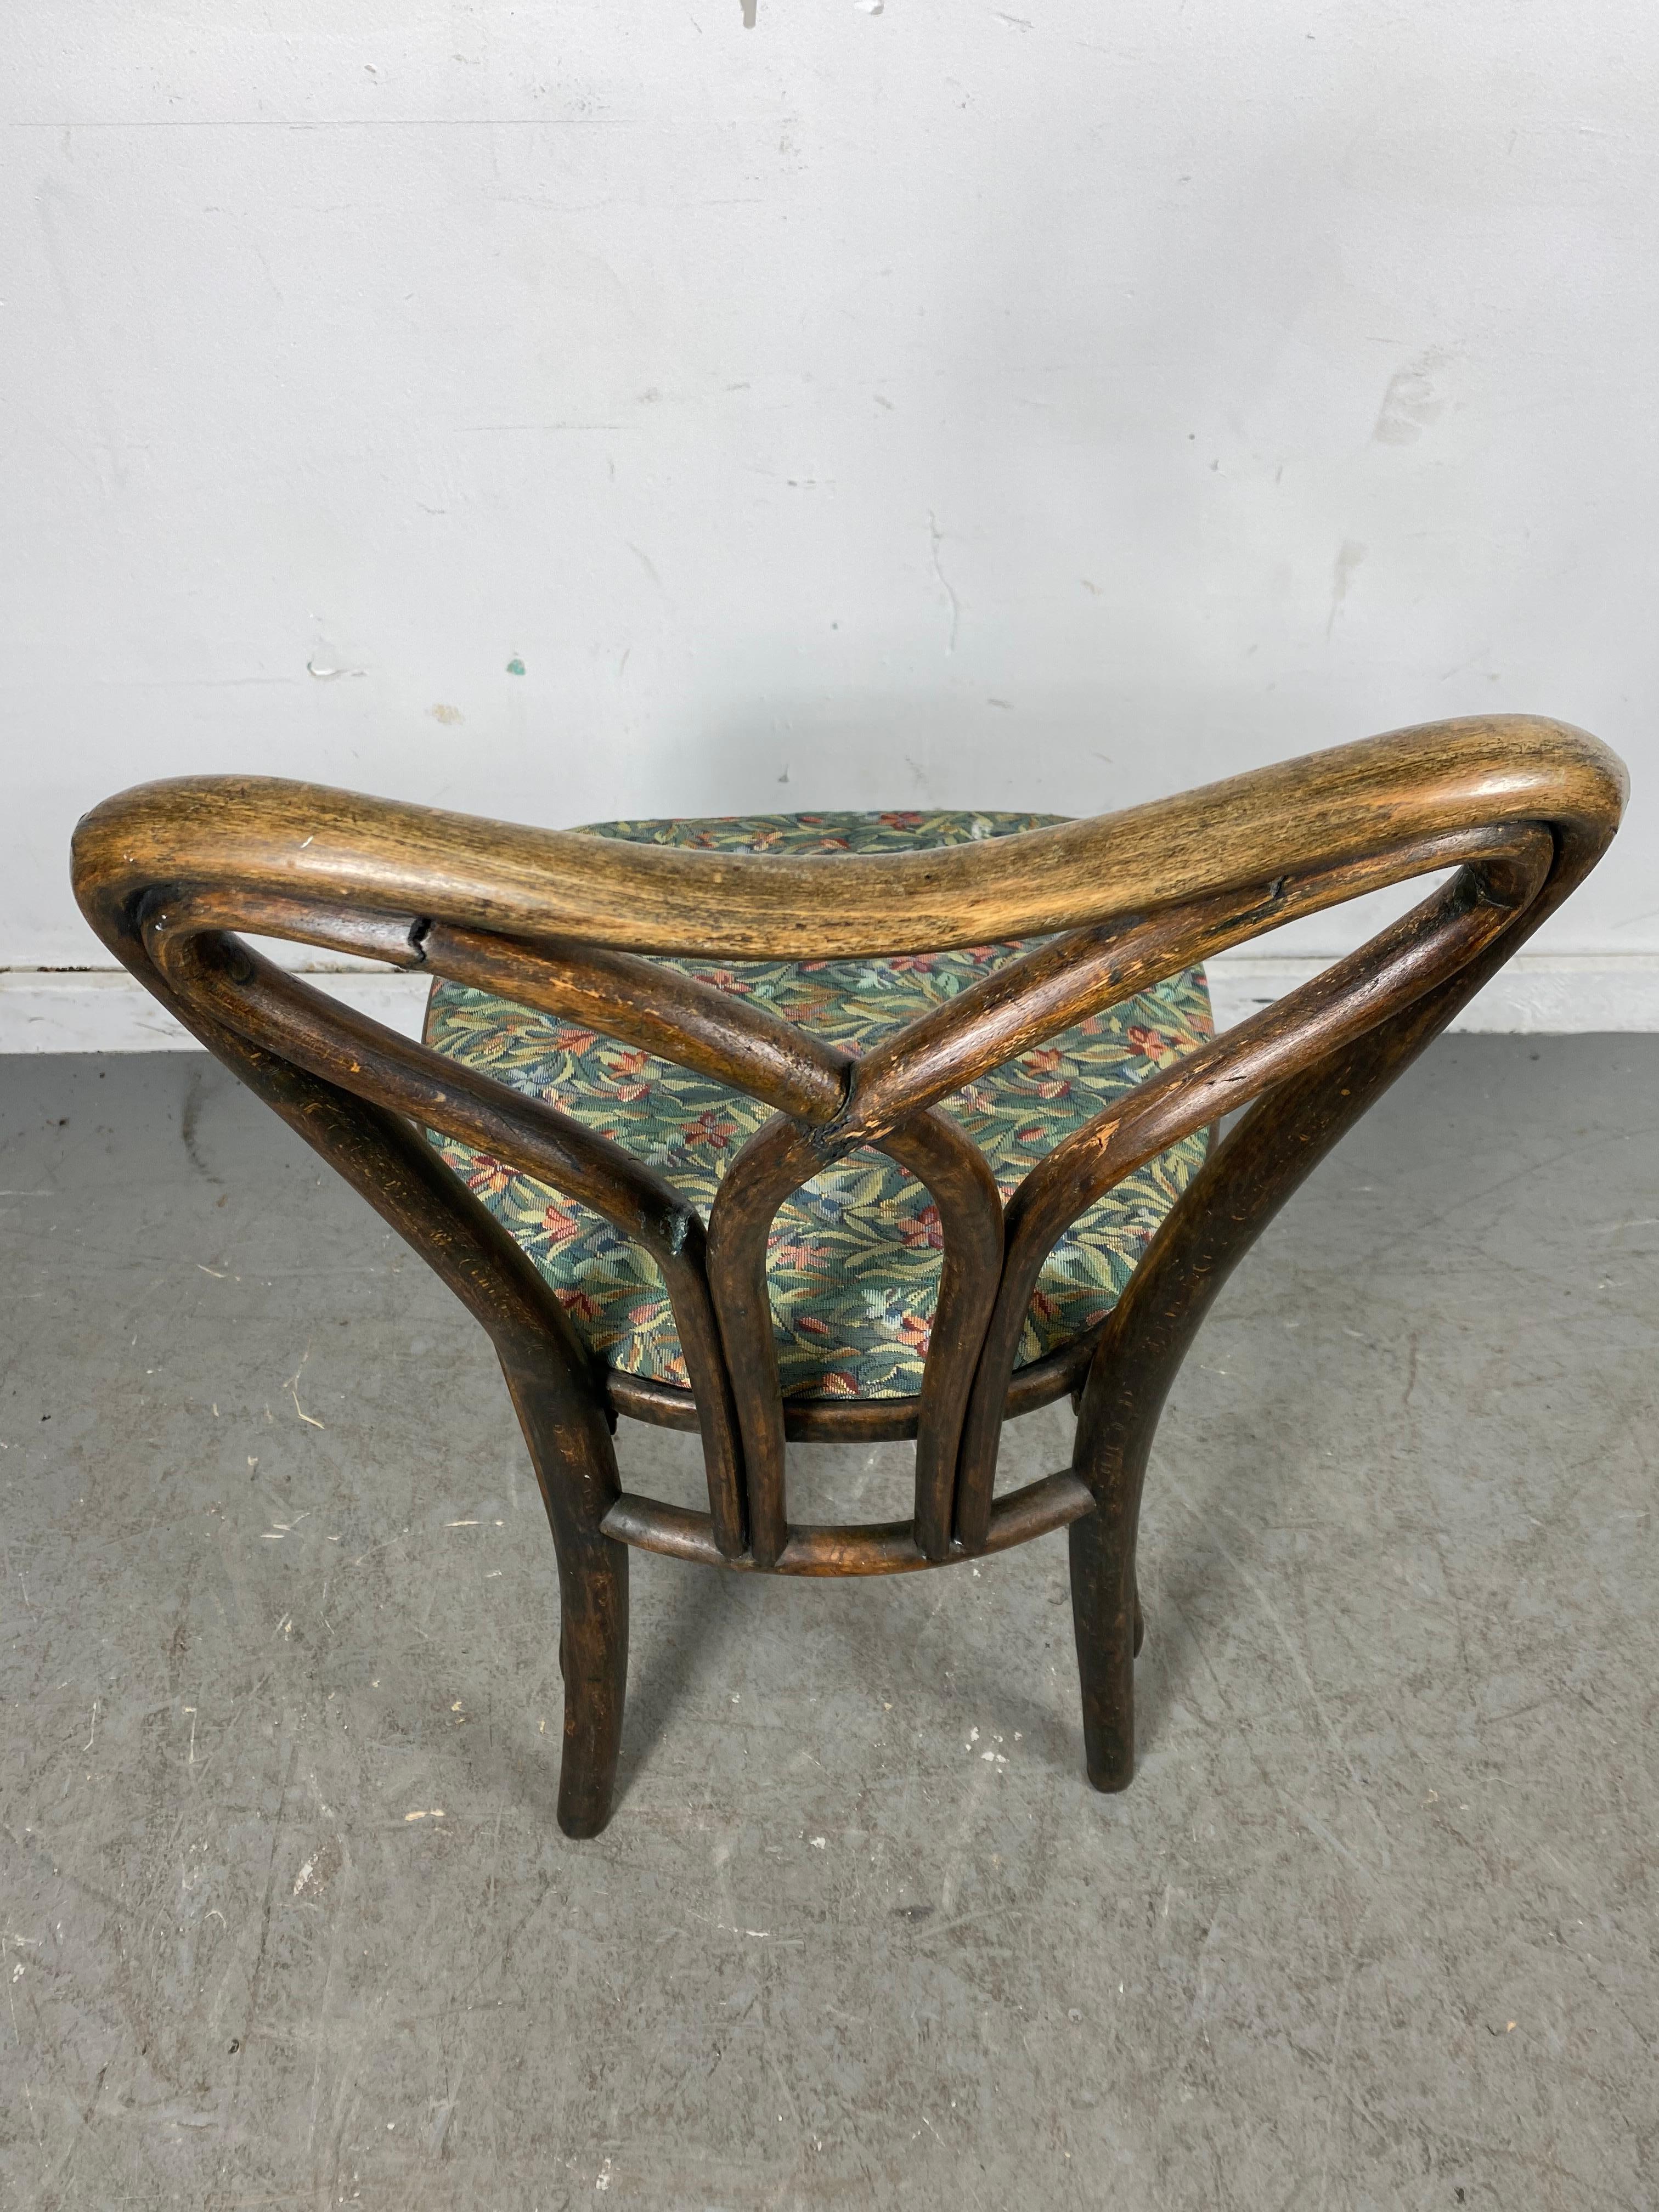 Early 20th Century Austrian Art Nouveau Bentwood Side Chair Attributed to J & J Kohn, Early 1900's For Sale